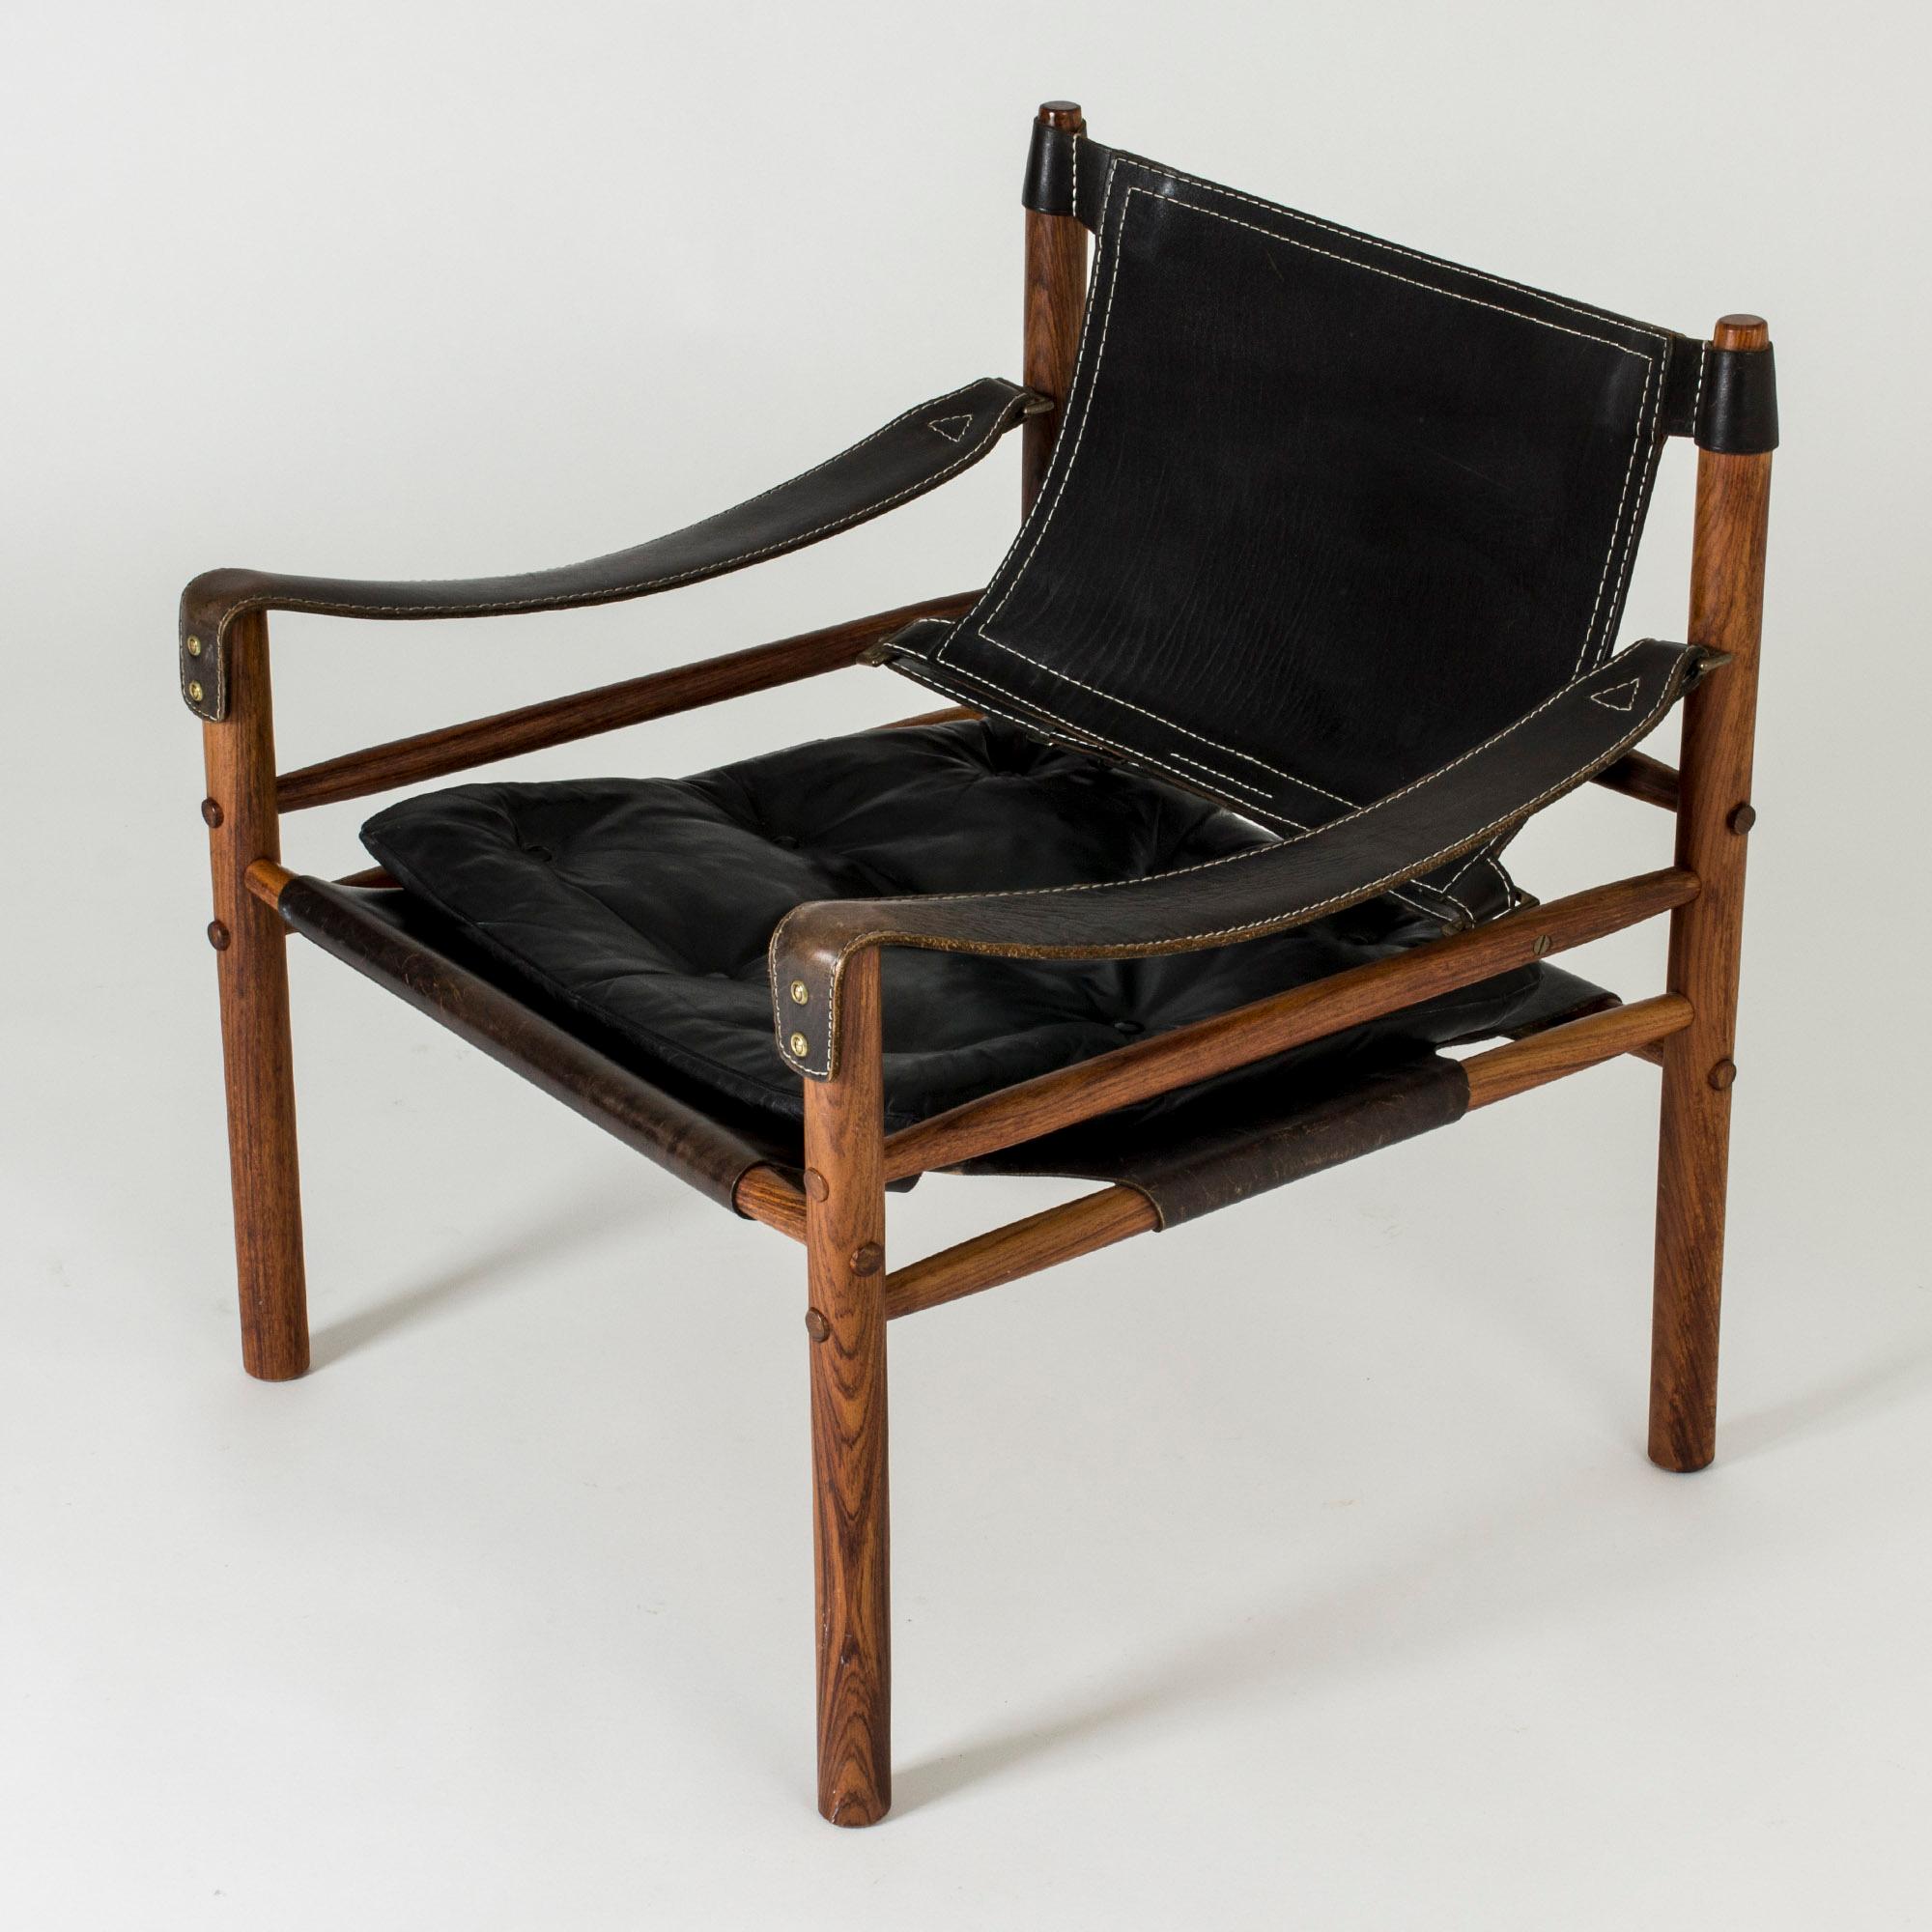 “Sirocco” lounge chair by Arne Norell. Rosewood frame and black leather upholstery, with a removable cushion. Great details of wood plugs decorating the screw holes, seams in the leather and brass buckles.